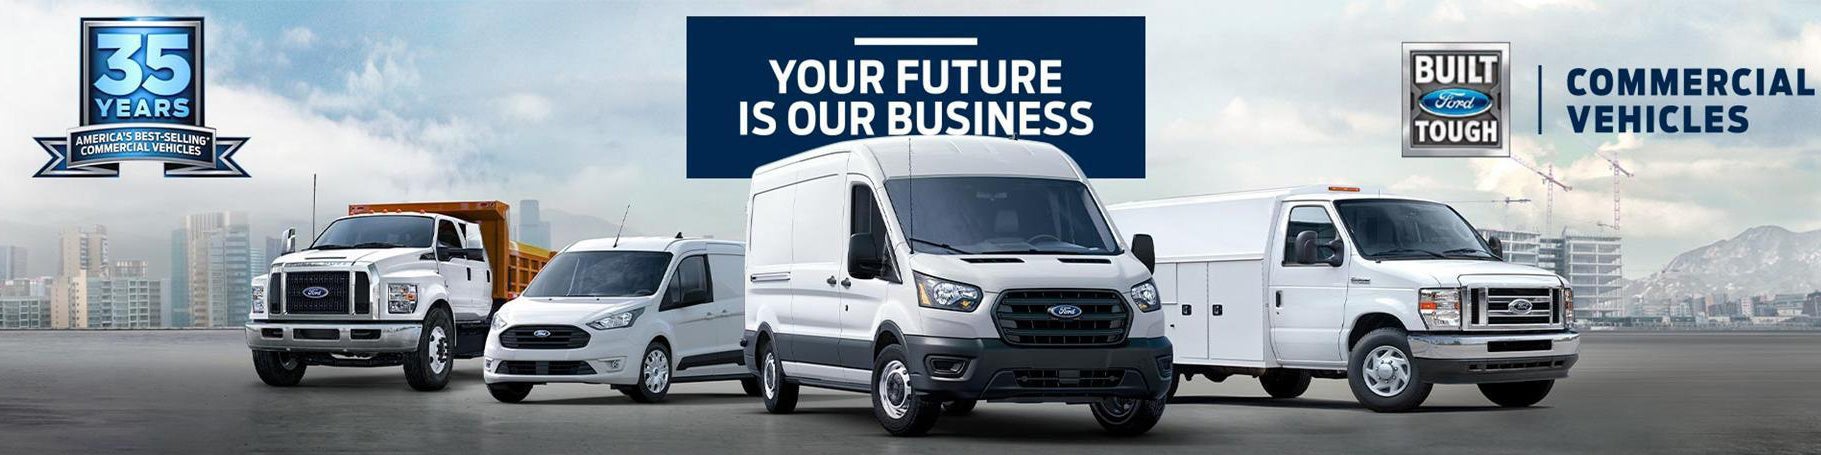 Ford Commercial Vehicles Near You